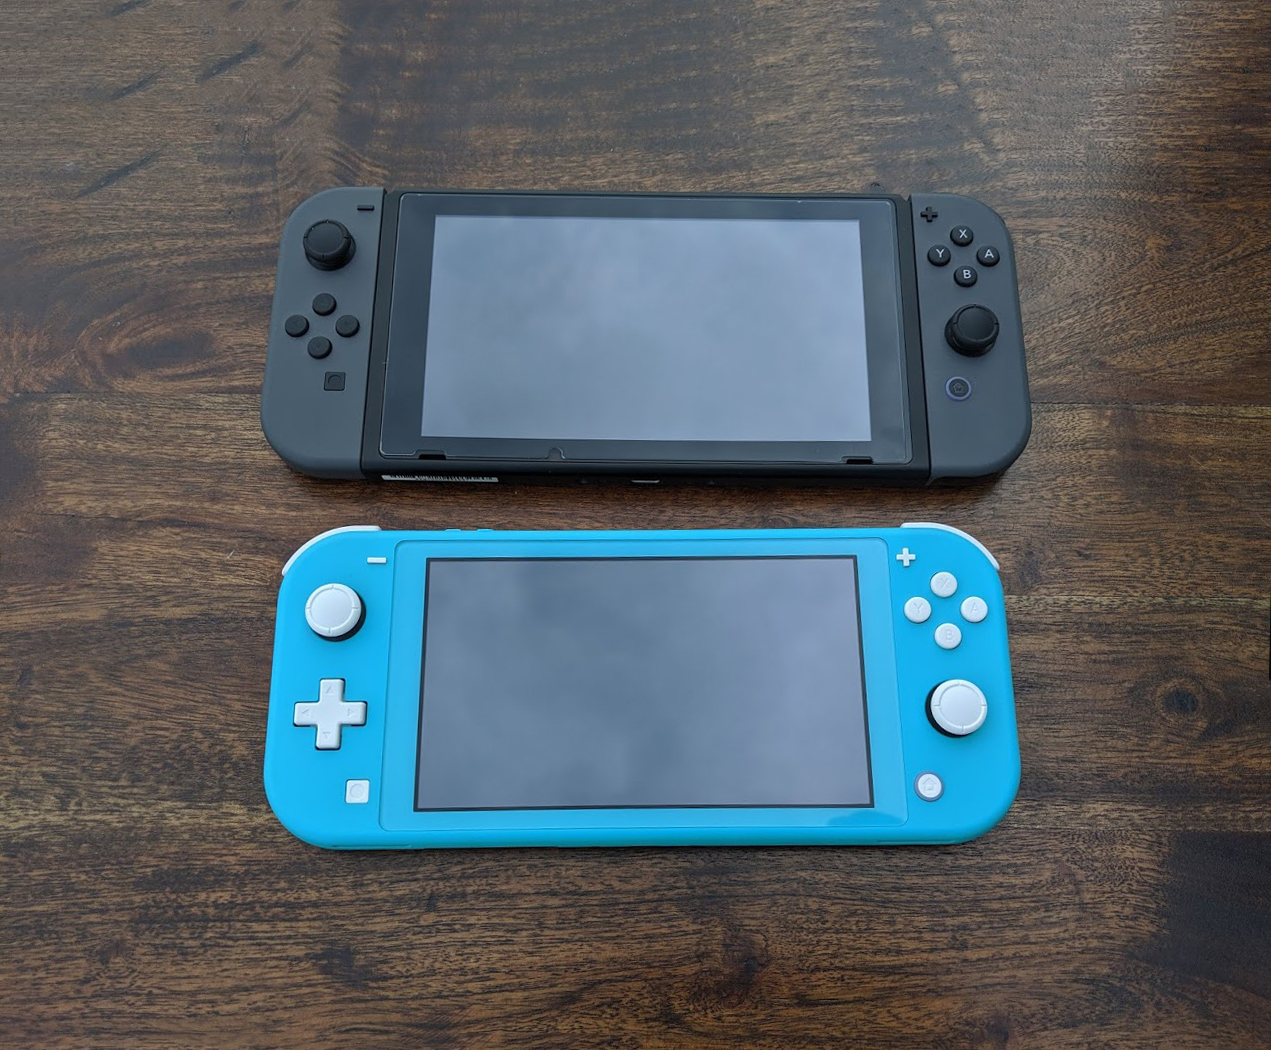 How to transfer old saves and downloads to a Nintendo Switch Lite